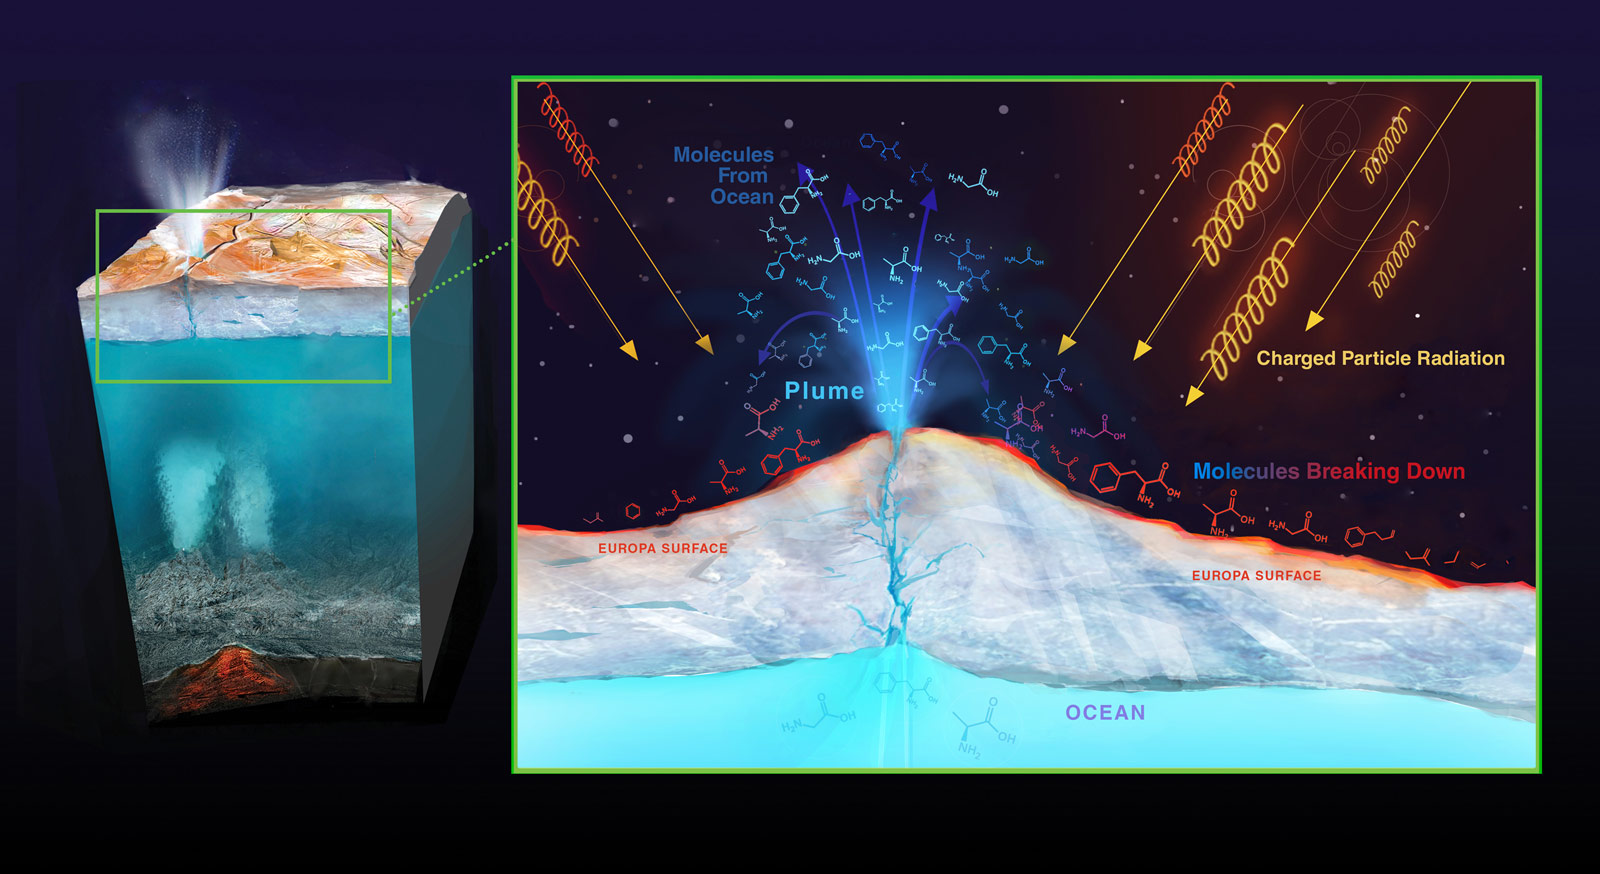 Cutaway view showing subsurface ocean and illustration of radiation from space.